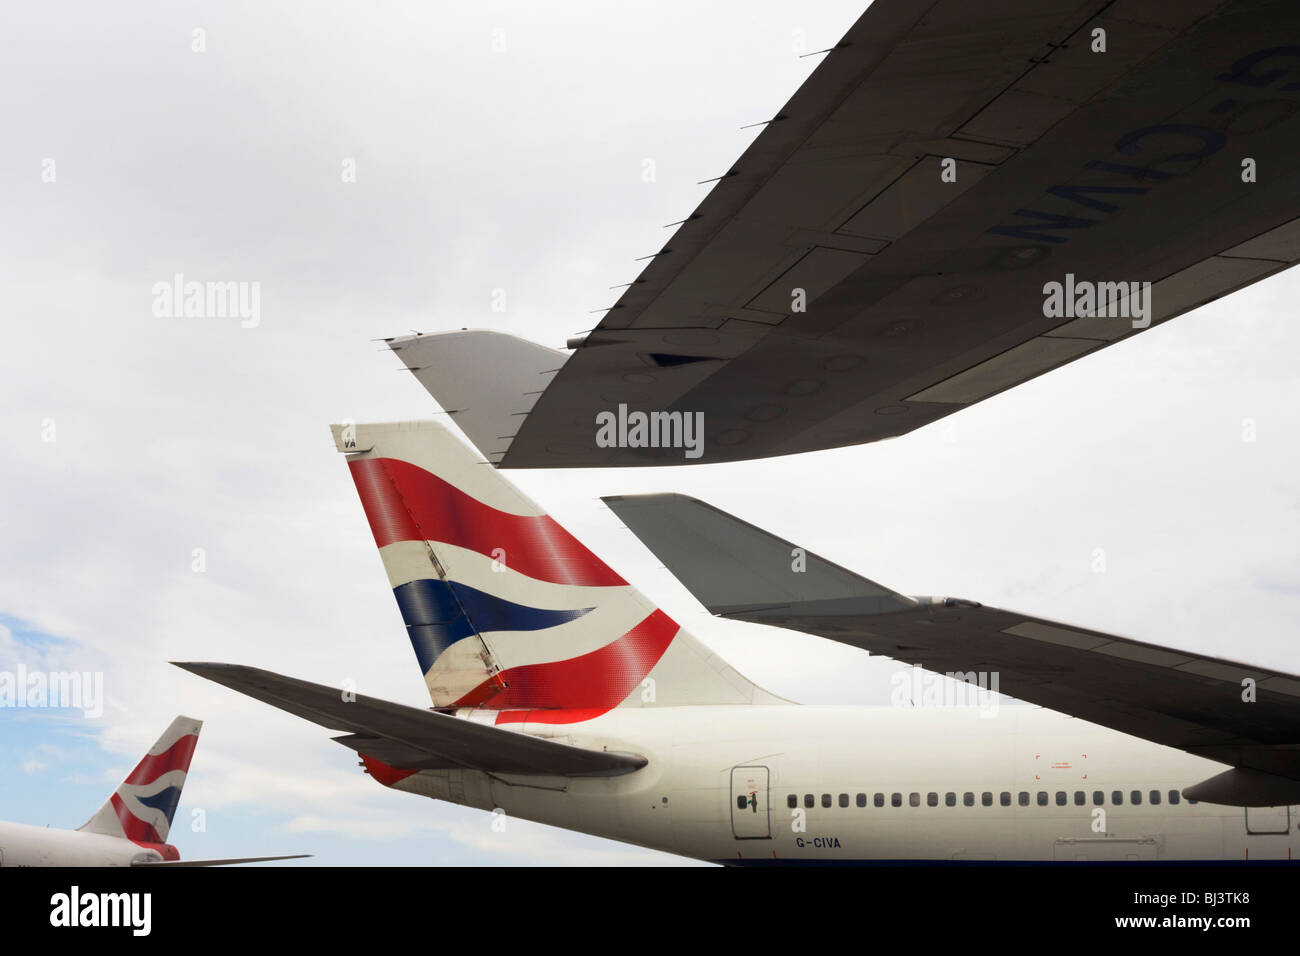 Wing tips and tails from British Airways 747-400 jet airliners are almost touching during their respective turnarounds. Stock Photo